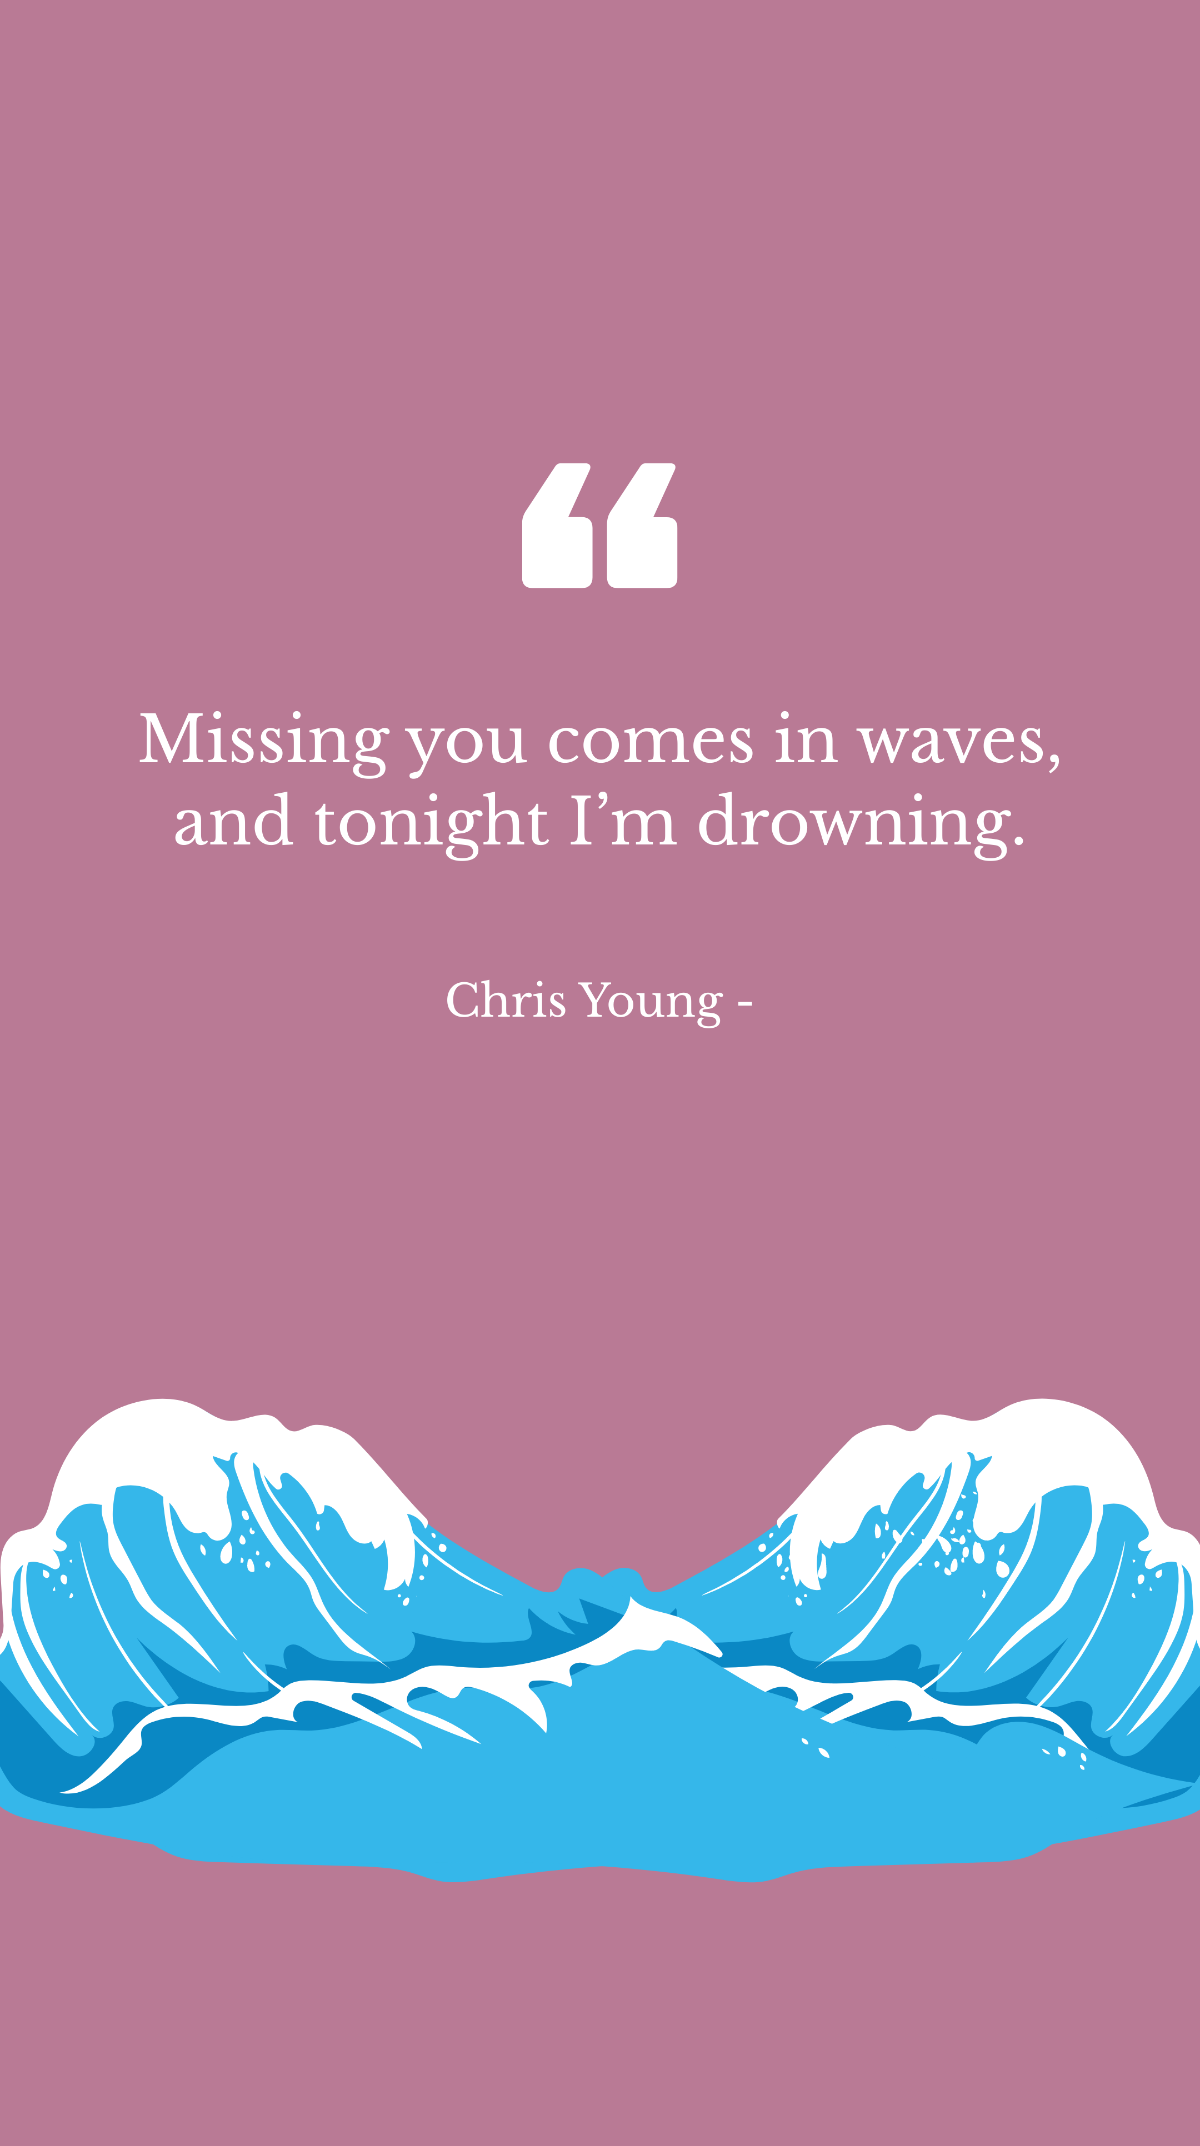 Chris Young - Missing you comes in waves, and tonight I’m drowning. Template